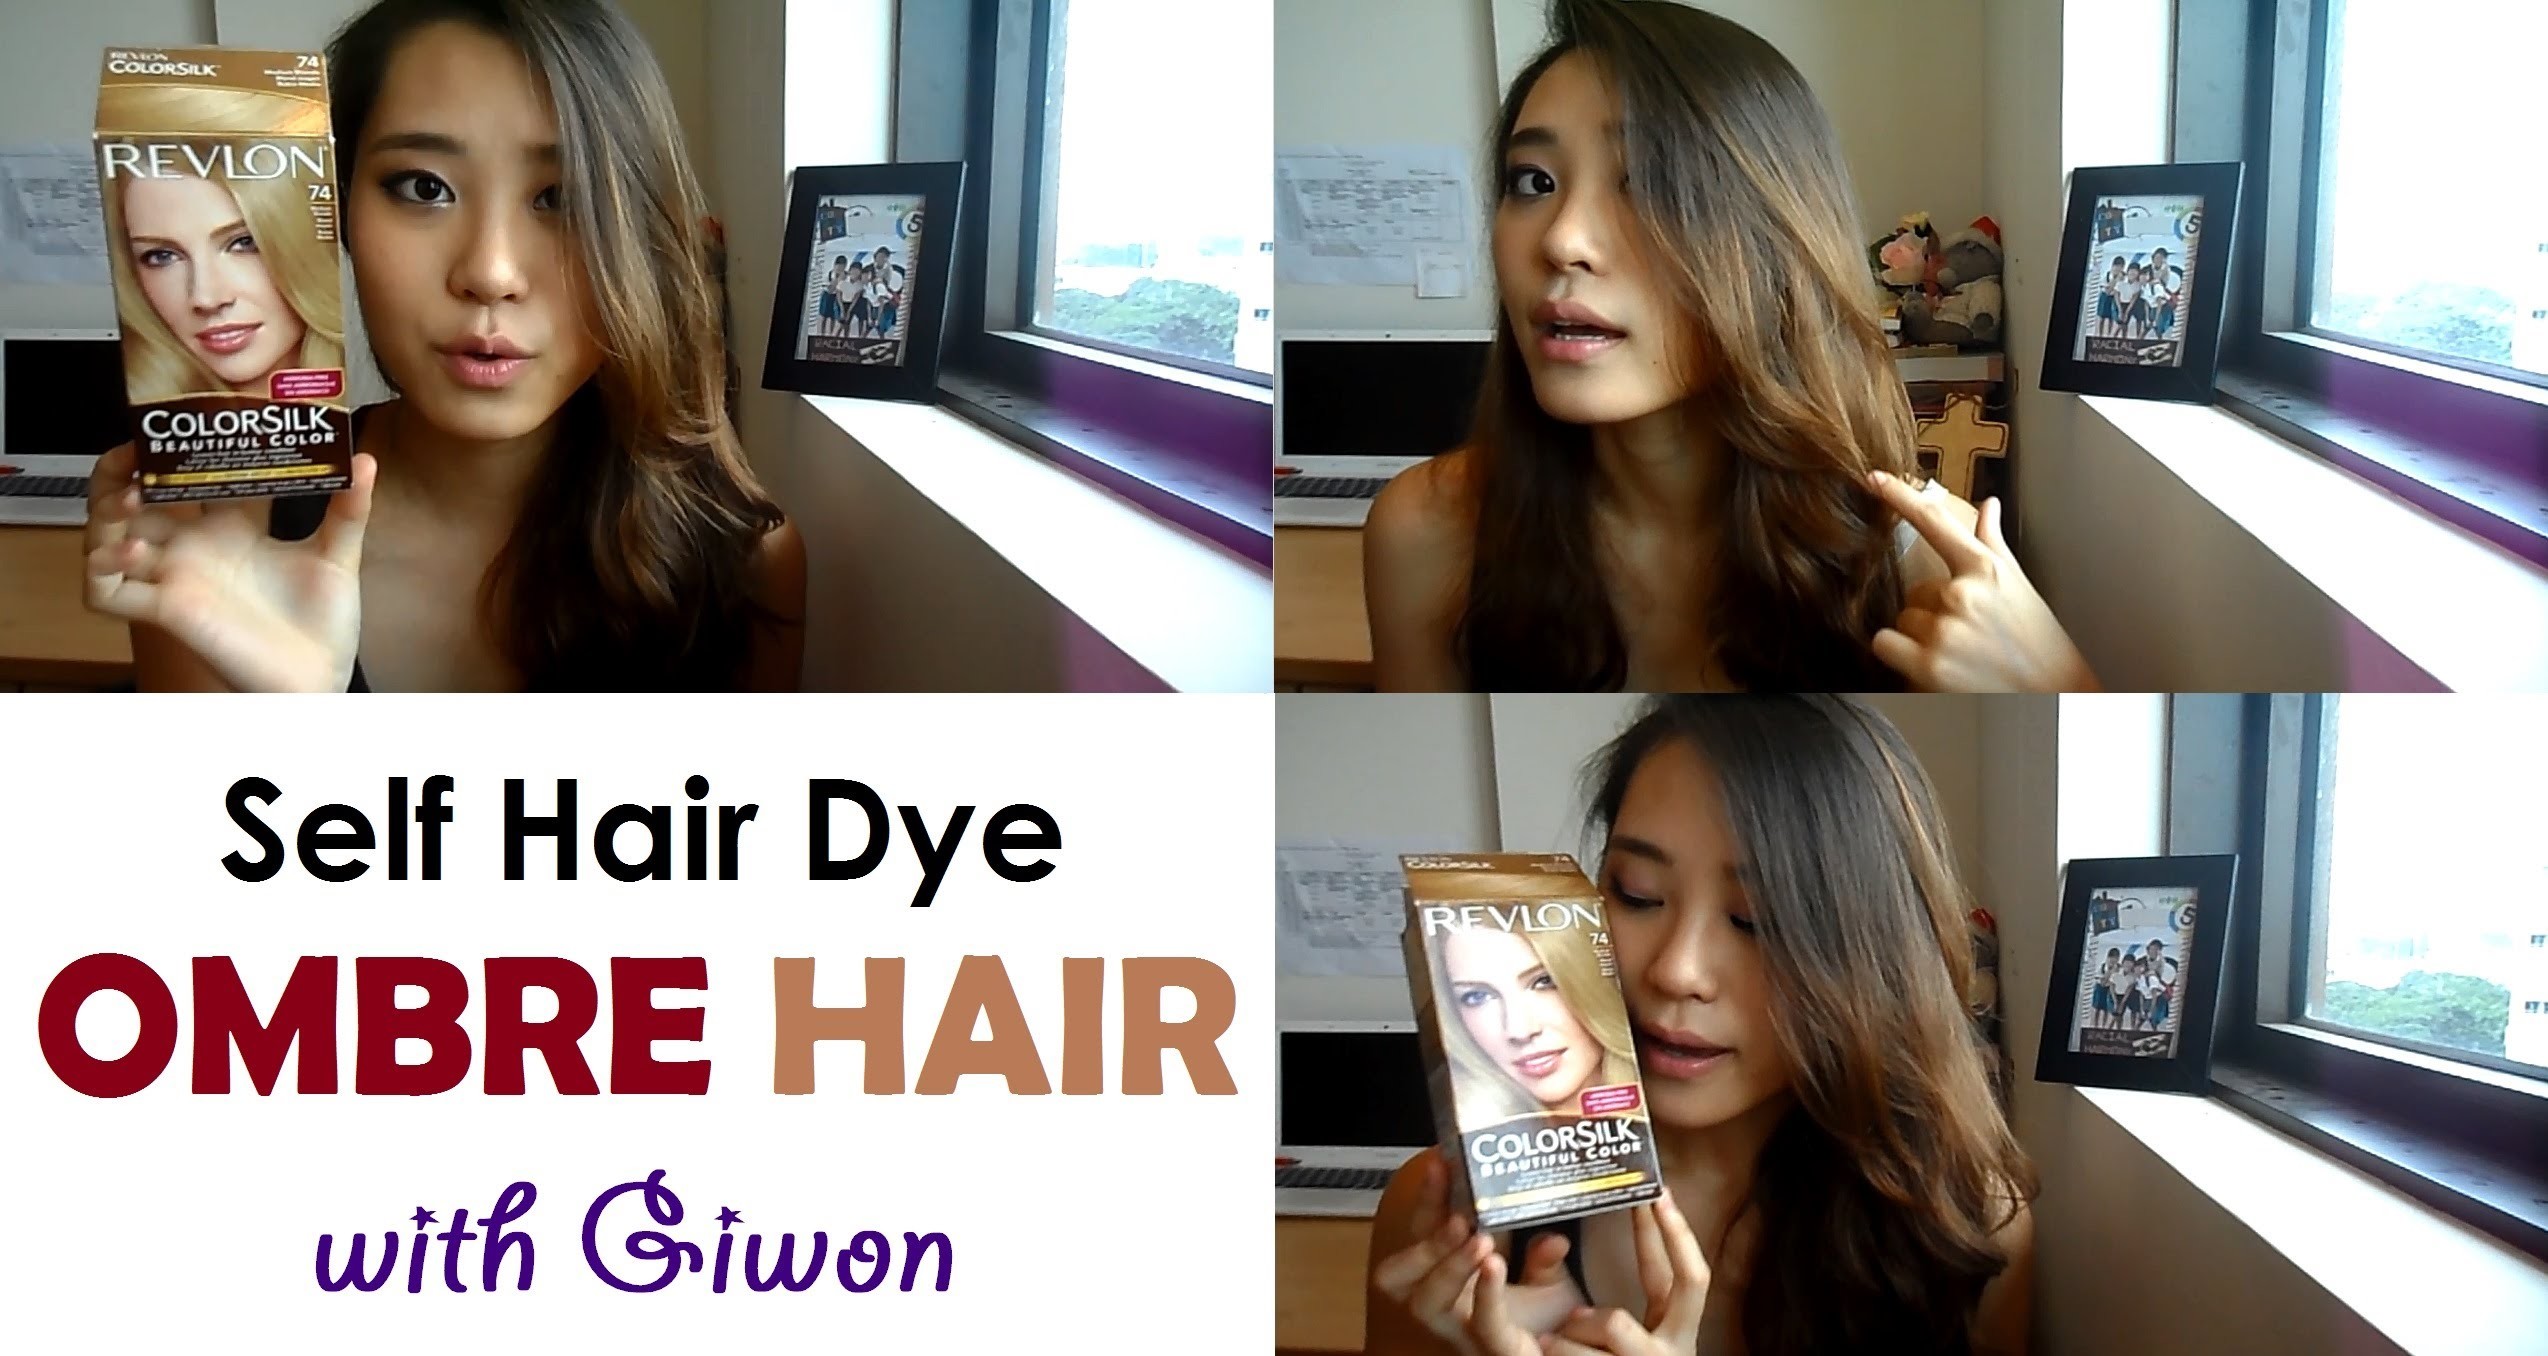 1. How to Dye Ombre Hair Blonde at Home - wide 9